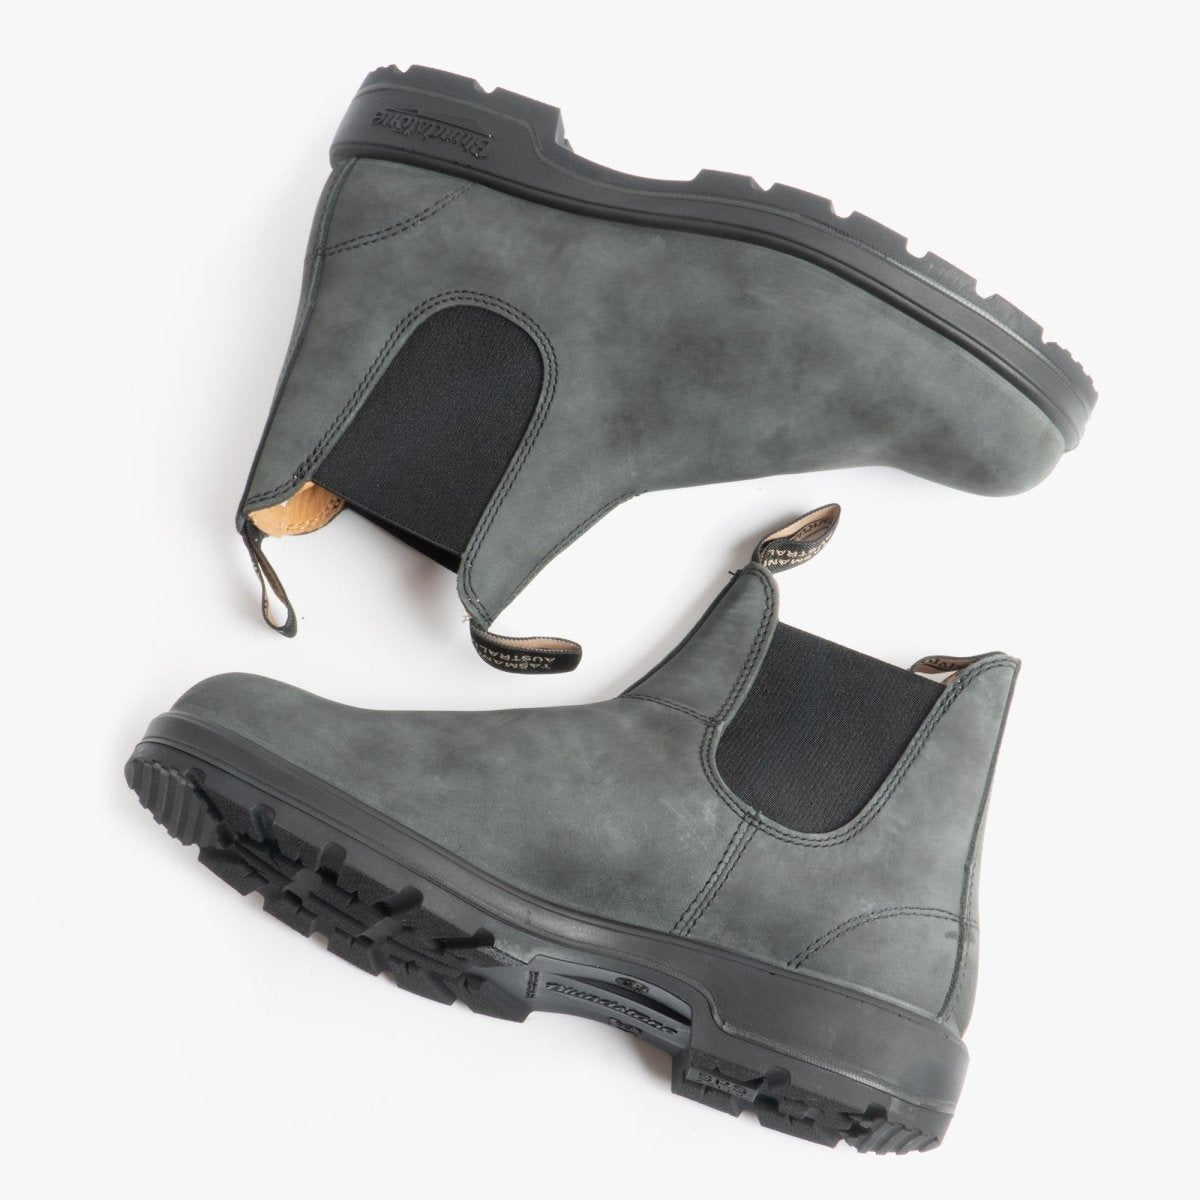 Blundstone 587 Unisex Leather Chelsea Boots Rustic Black 587 - 3 | STB.co.uk